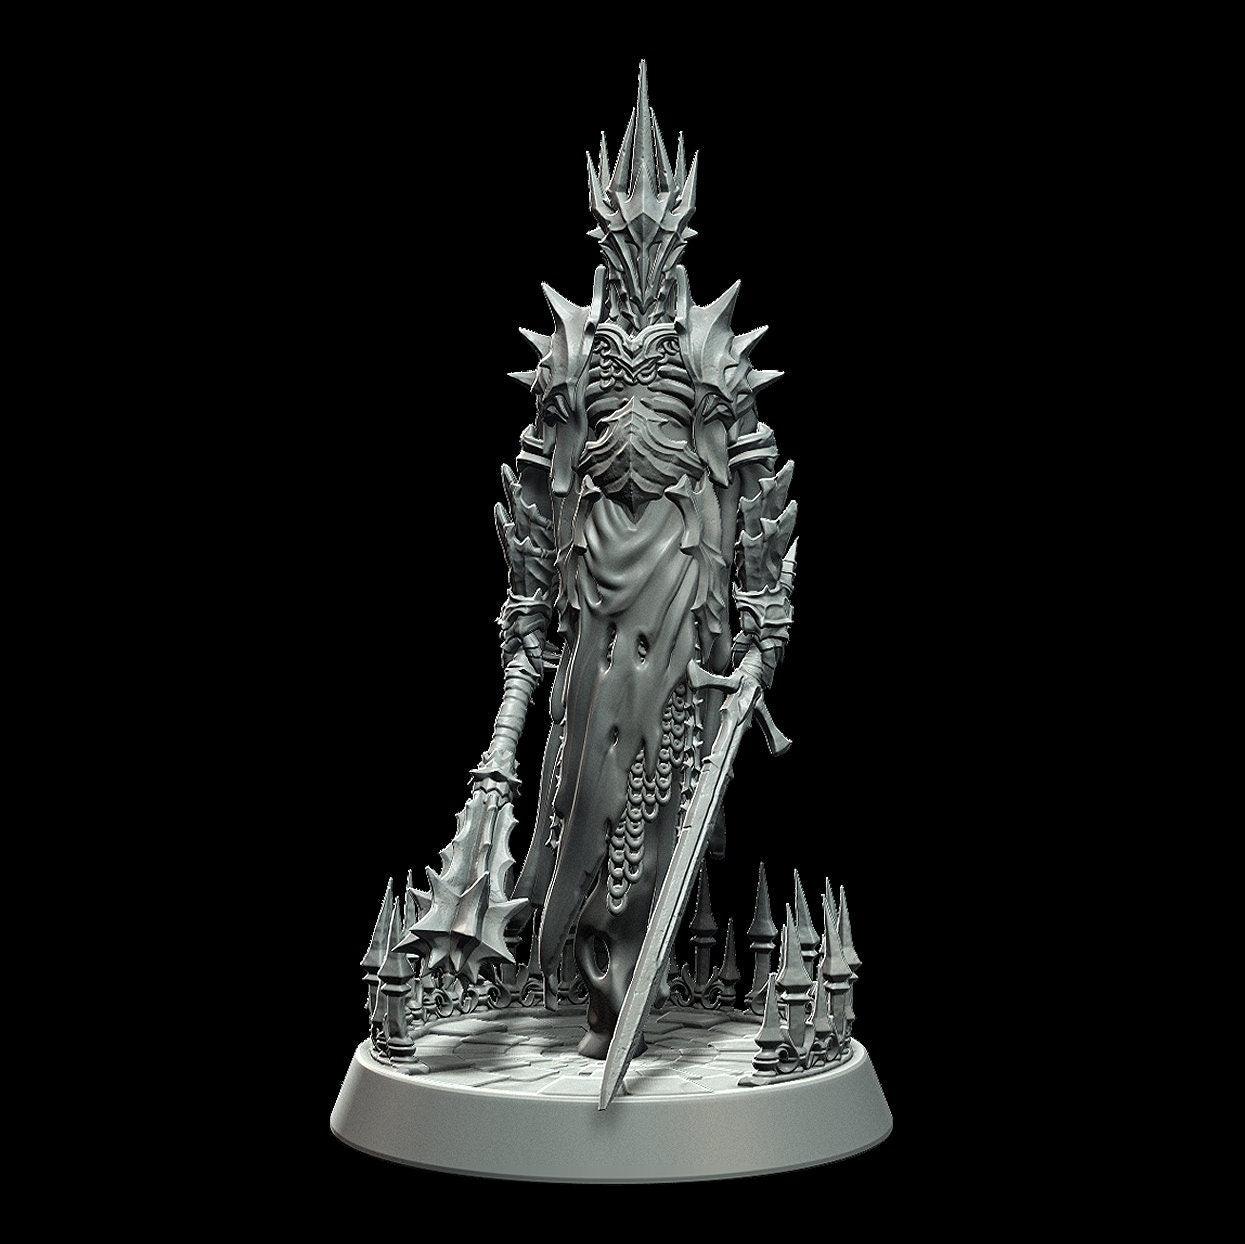 Fallen Wraithlord Miniature Undead miniature - 3 Poses - 28mm scale Tabletop gaming DnD Miniature Dungeons and Dragons,dnd 5e - Plague Miniatures shop for DnD Miniatures